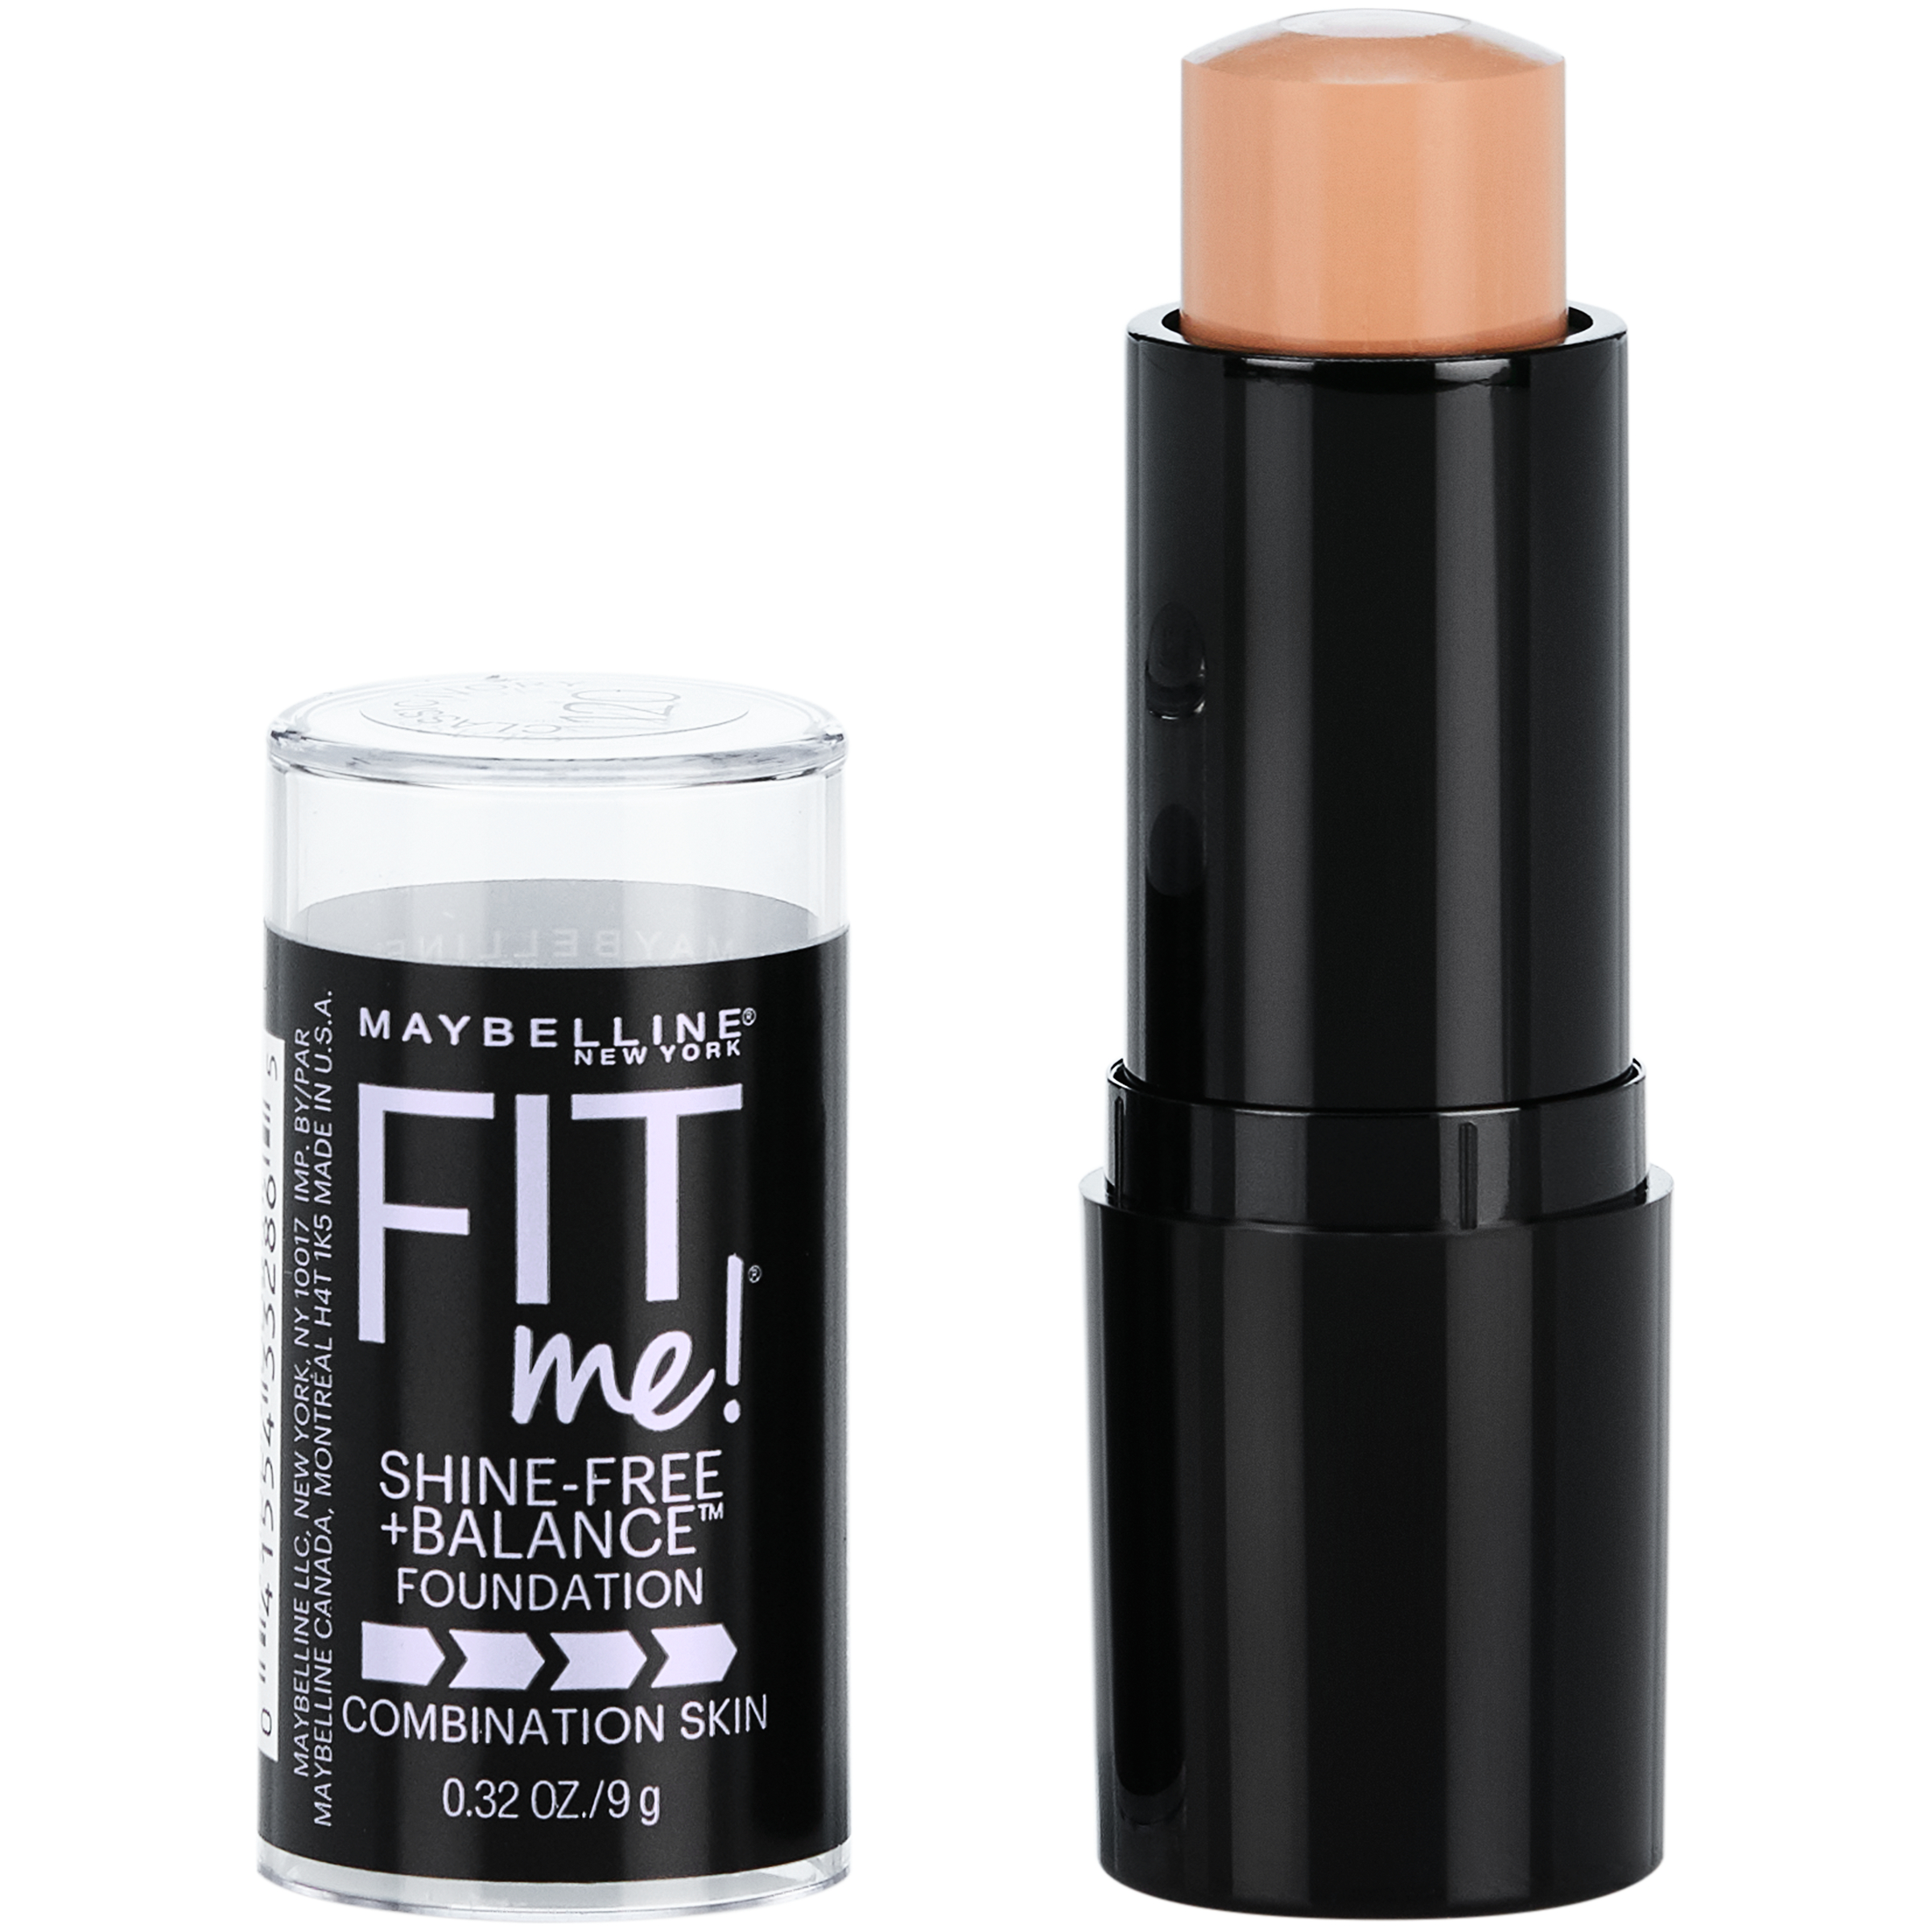 Maybelline Fit Me Shine-Free Stick Foundation Makeup, 120 Classic Ivory, 1 fl oz - image 1 of 6